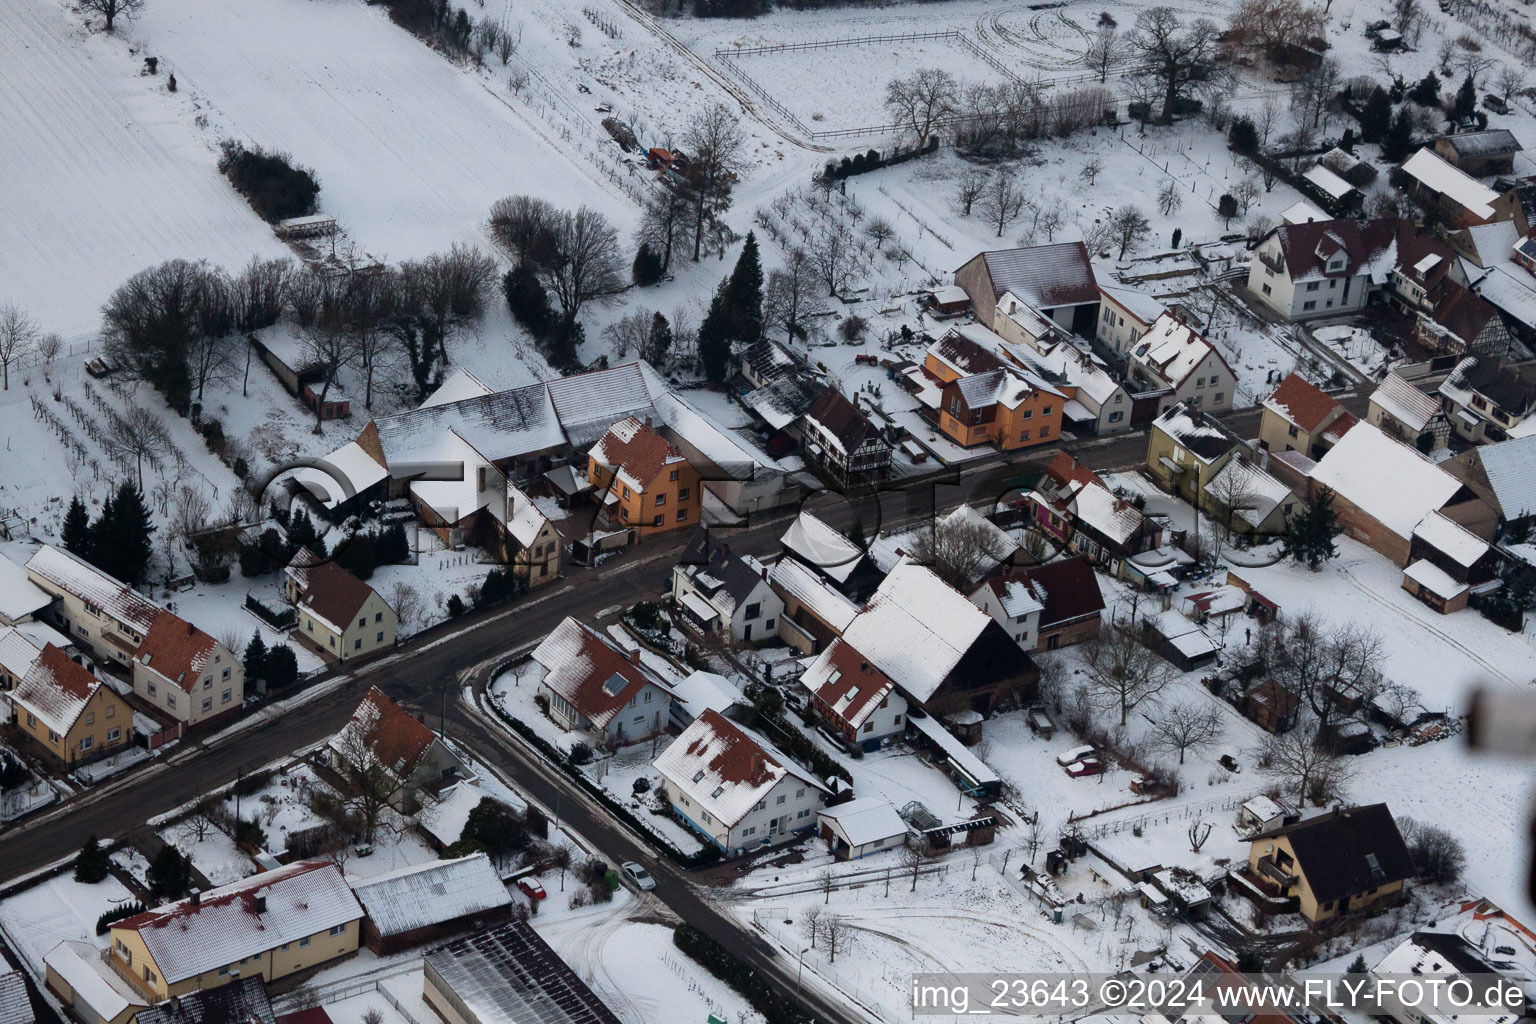 Aerial photograpy of In the snow in winter in the district Kleinsteinfeld in Niederotterbach in the state Rhineland-Palatinate, Germany